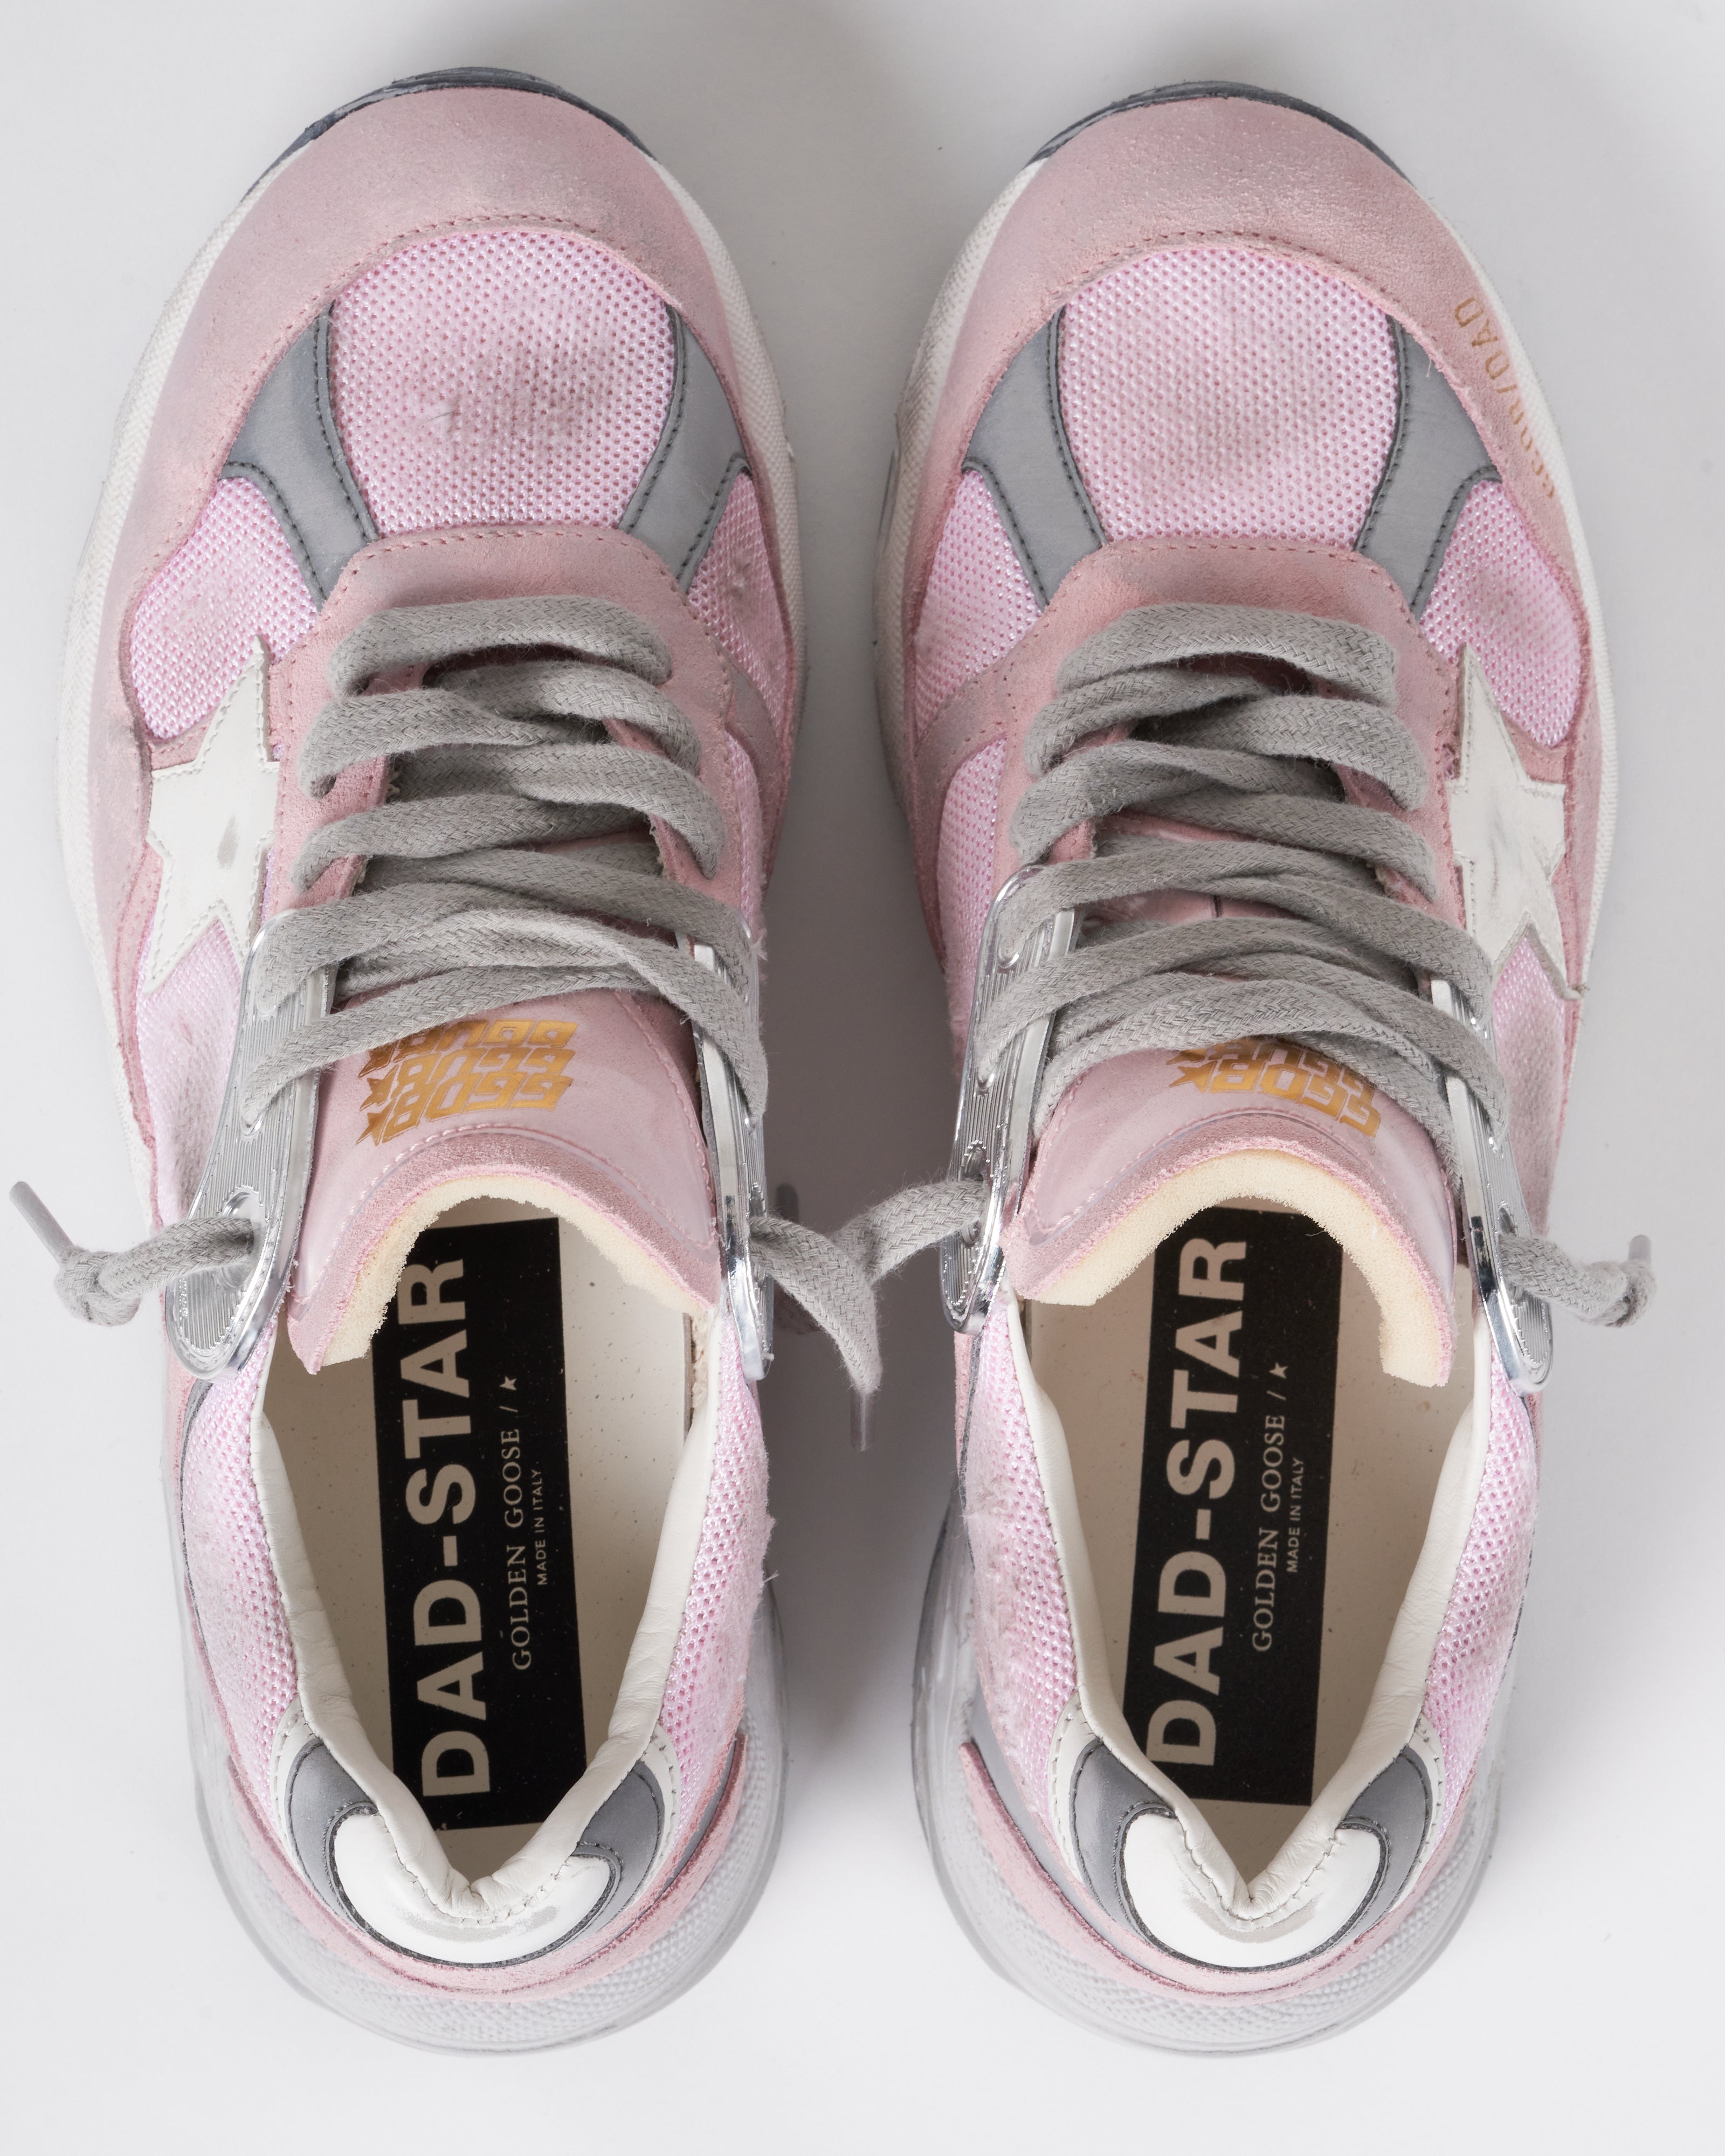 Golden Goose Running Dad Net And Suede Upper Leather Star Suede Spur Pink/White  80454